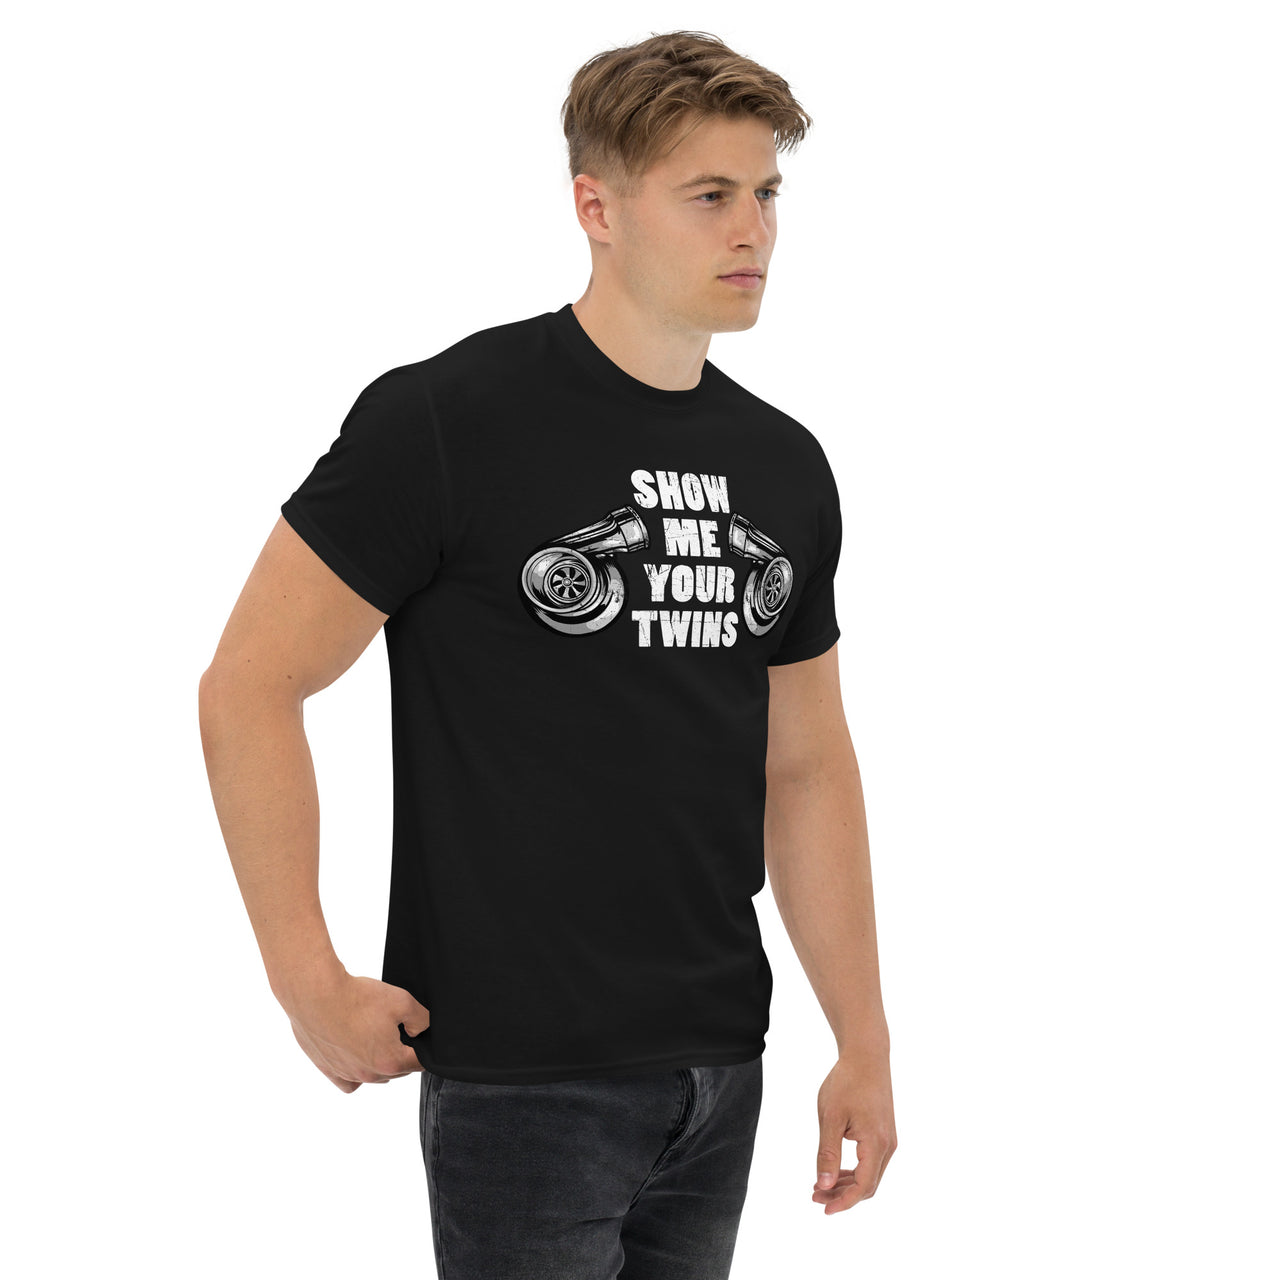 Show Me Your Twins Funny Turbo T-Shirt modeled  in black